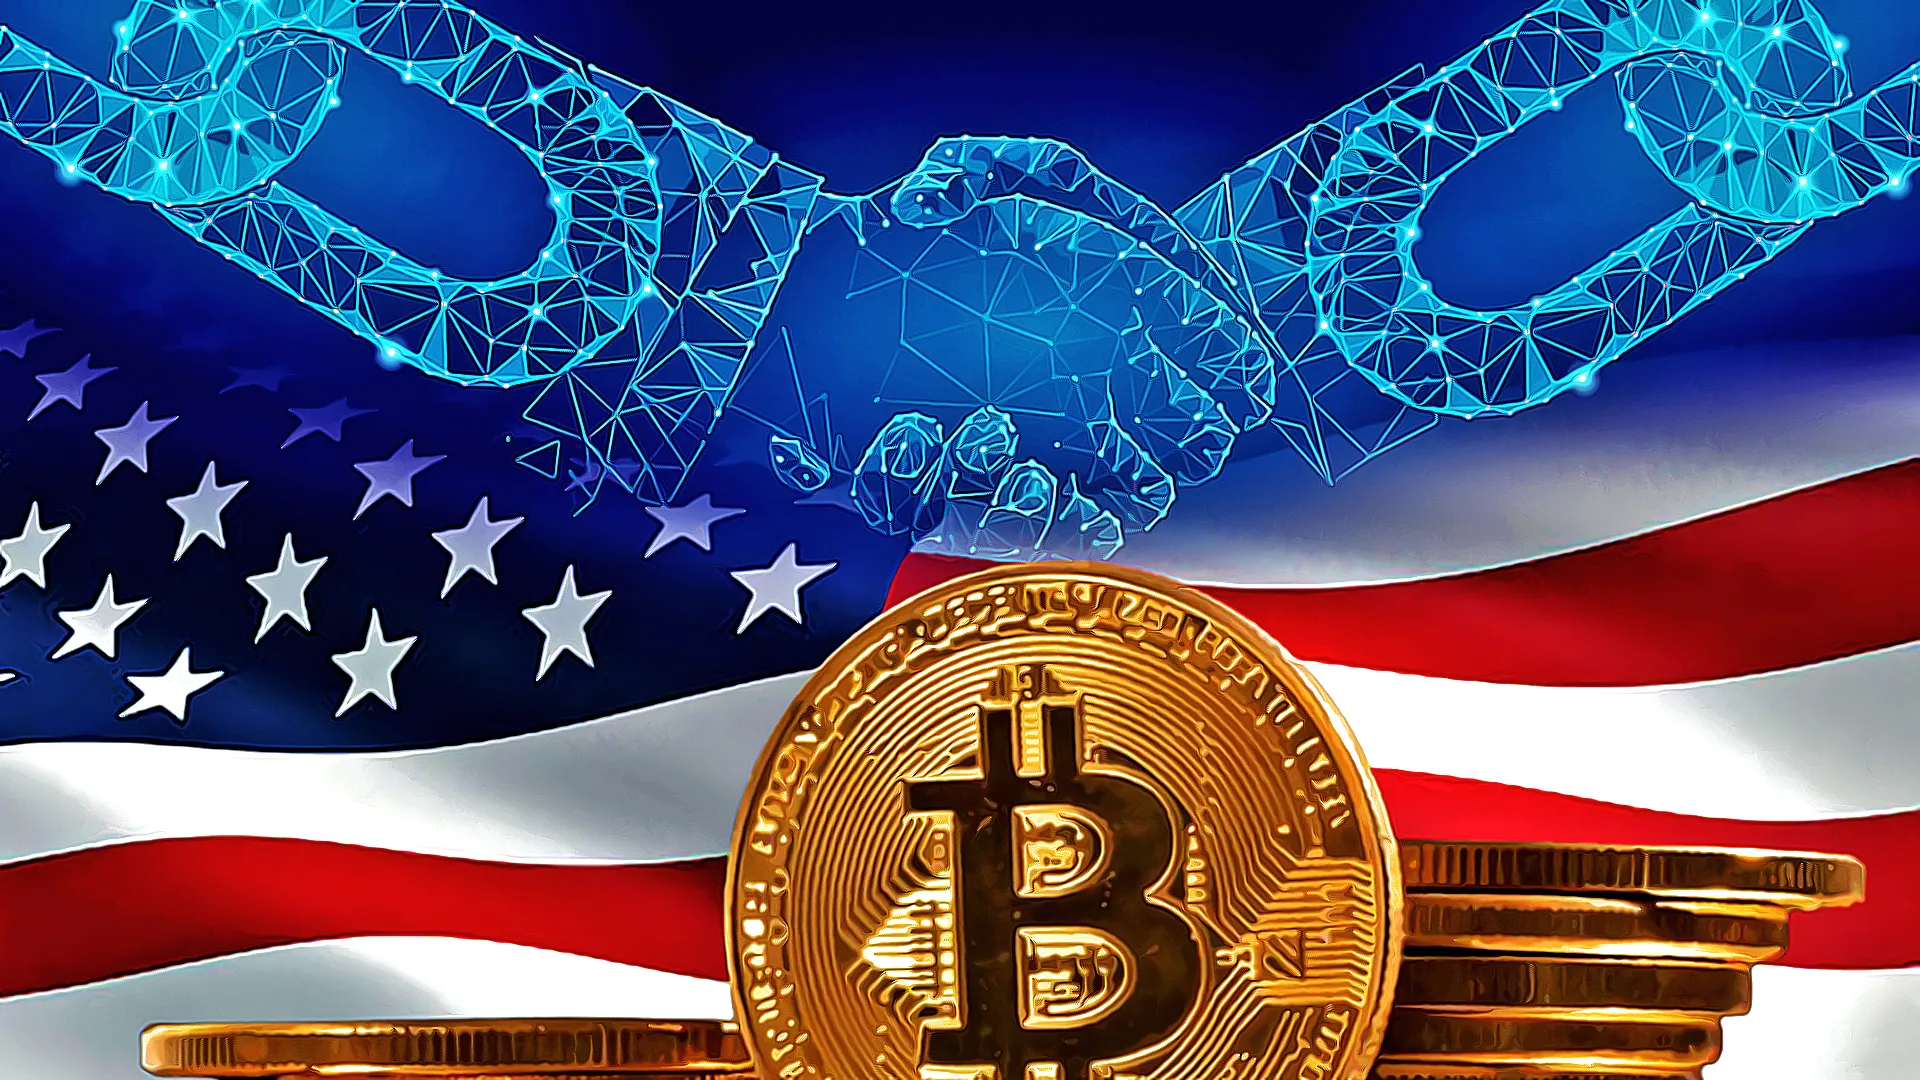 America is getting ready to dominant on digital assets